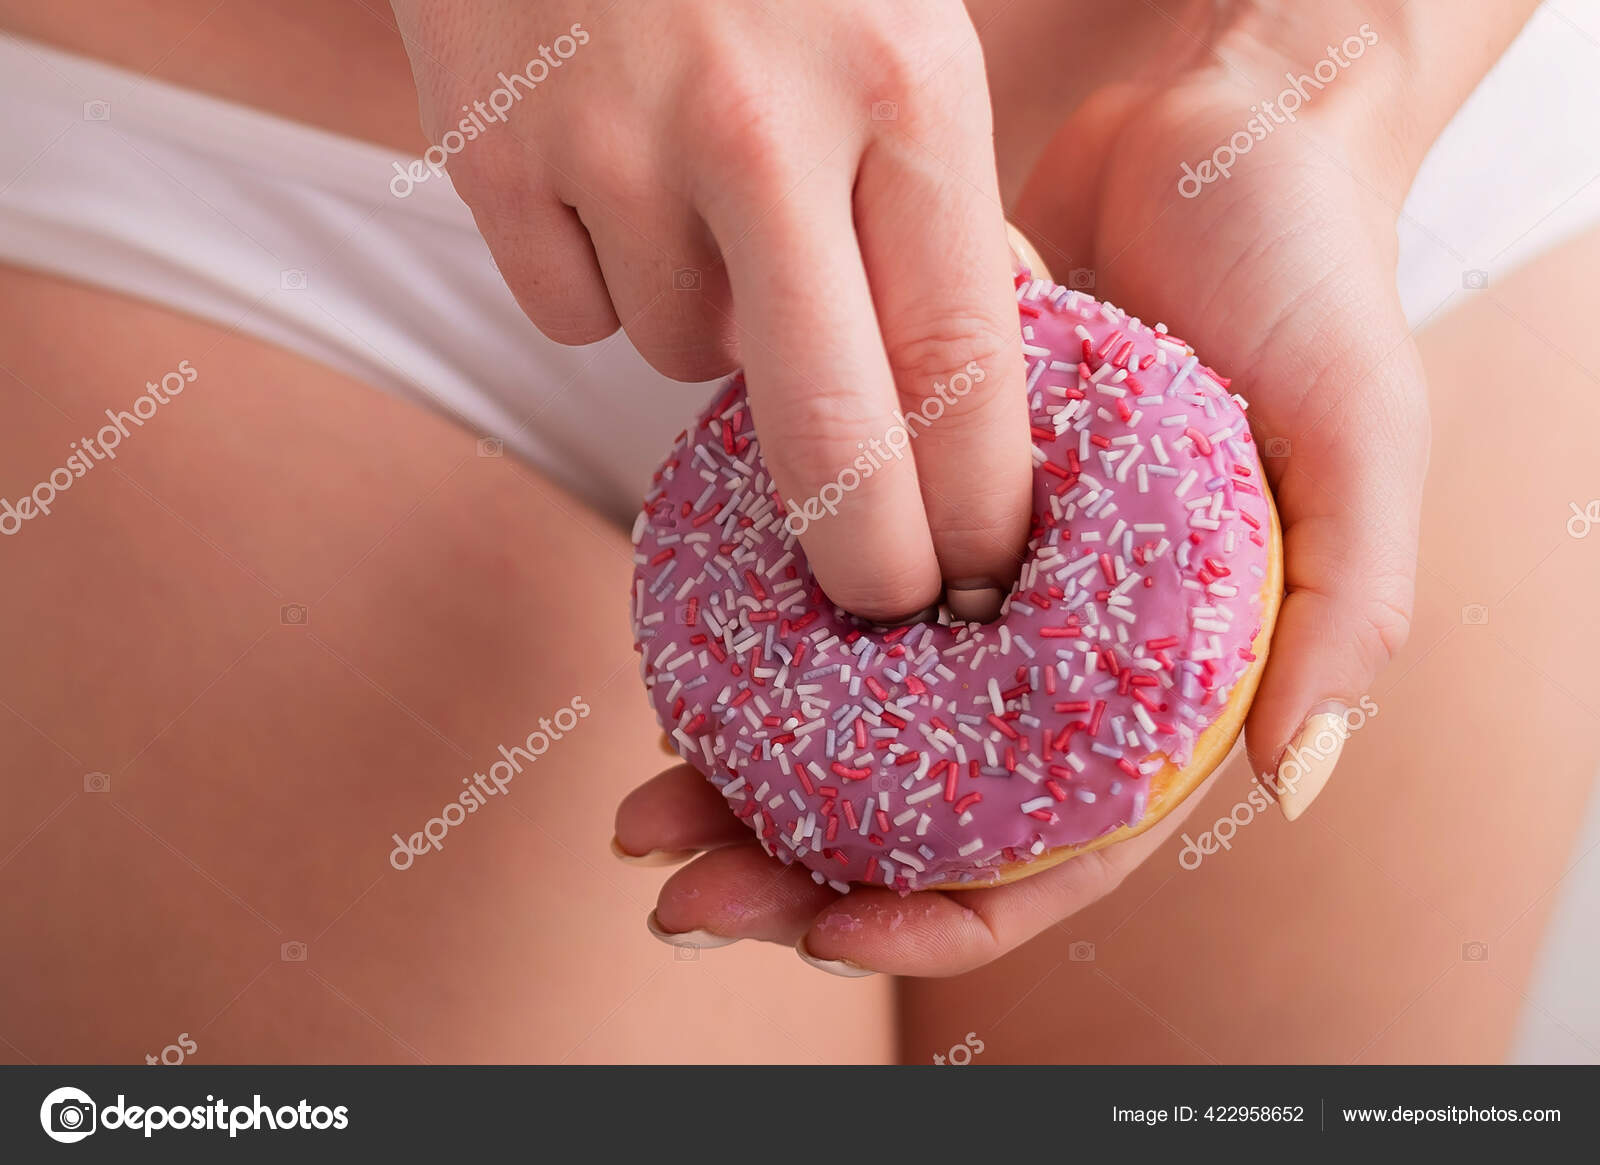 A faceless woman in white panties holds a pink donut imitating